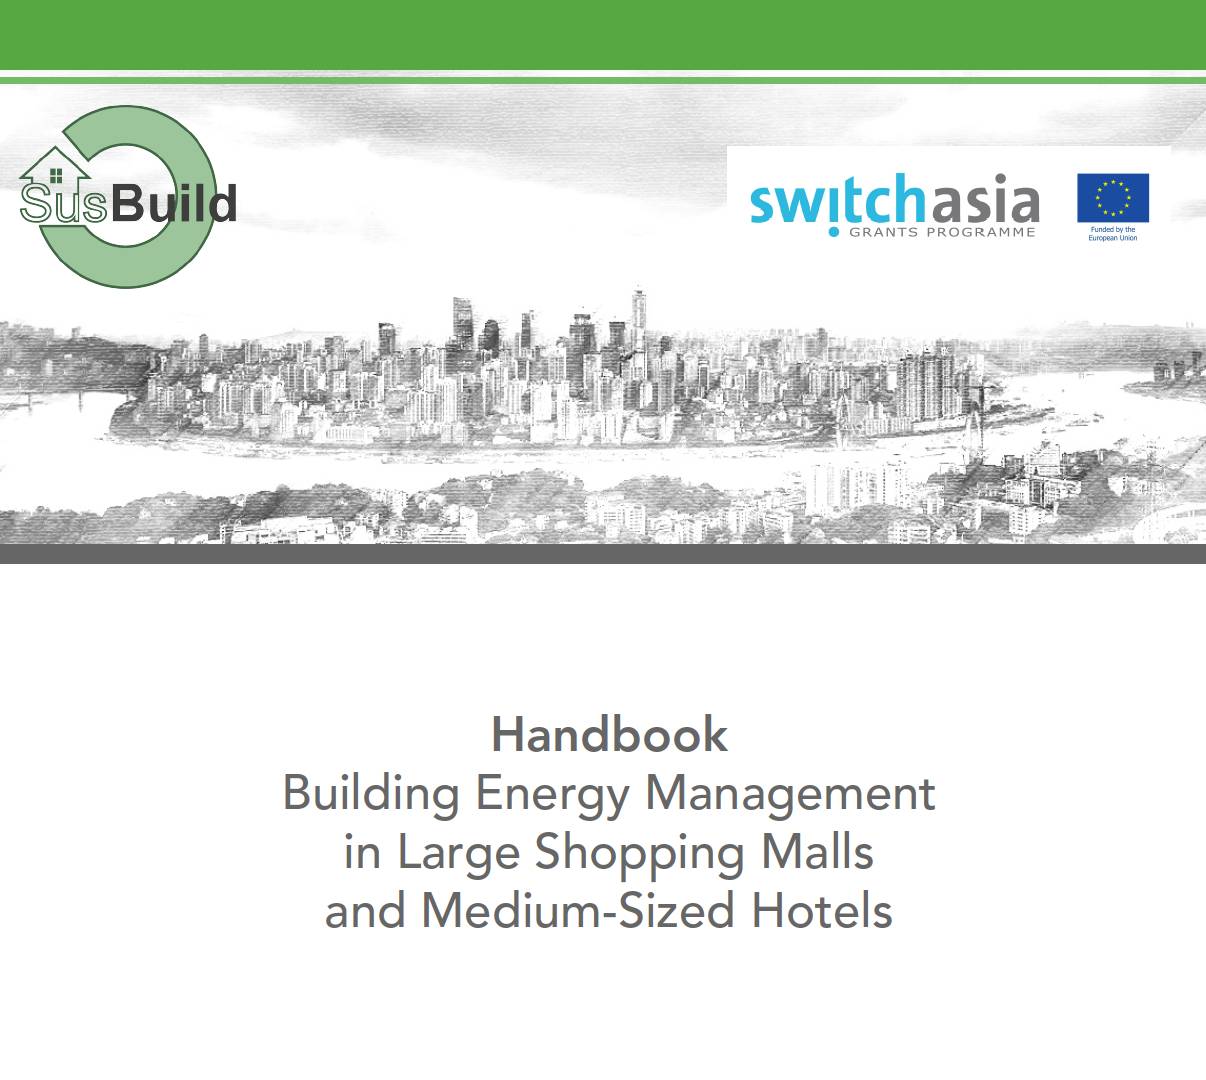 Handbook: Building Energy Management in Large Shopping Malls and Medium-Sized Hotels